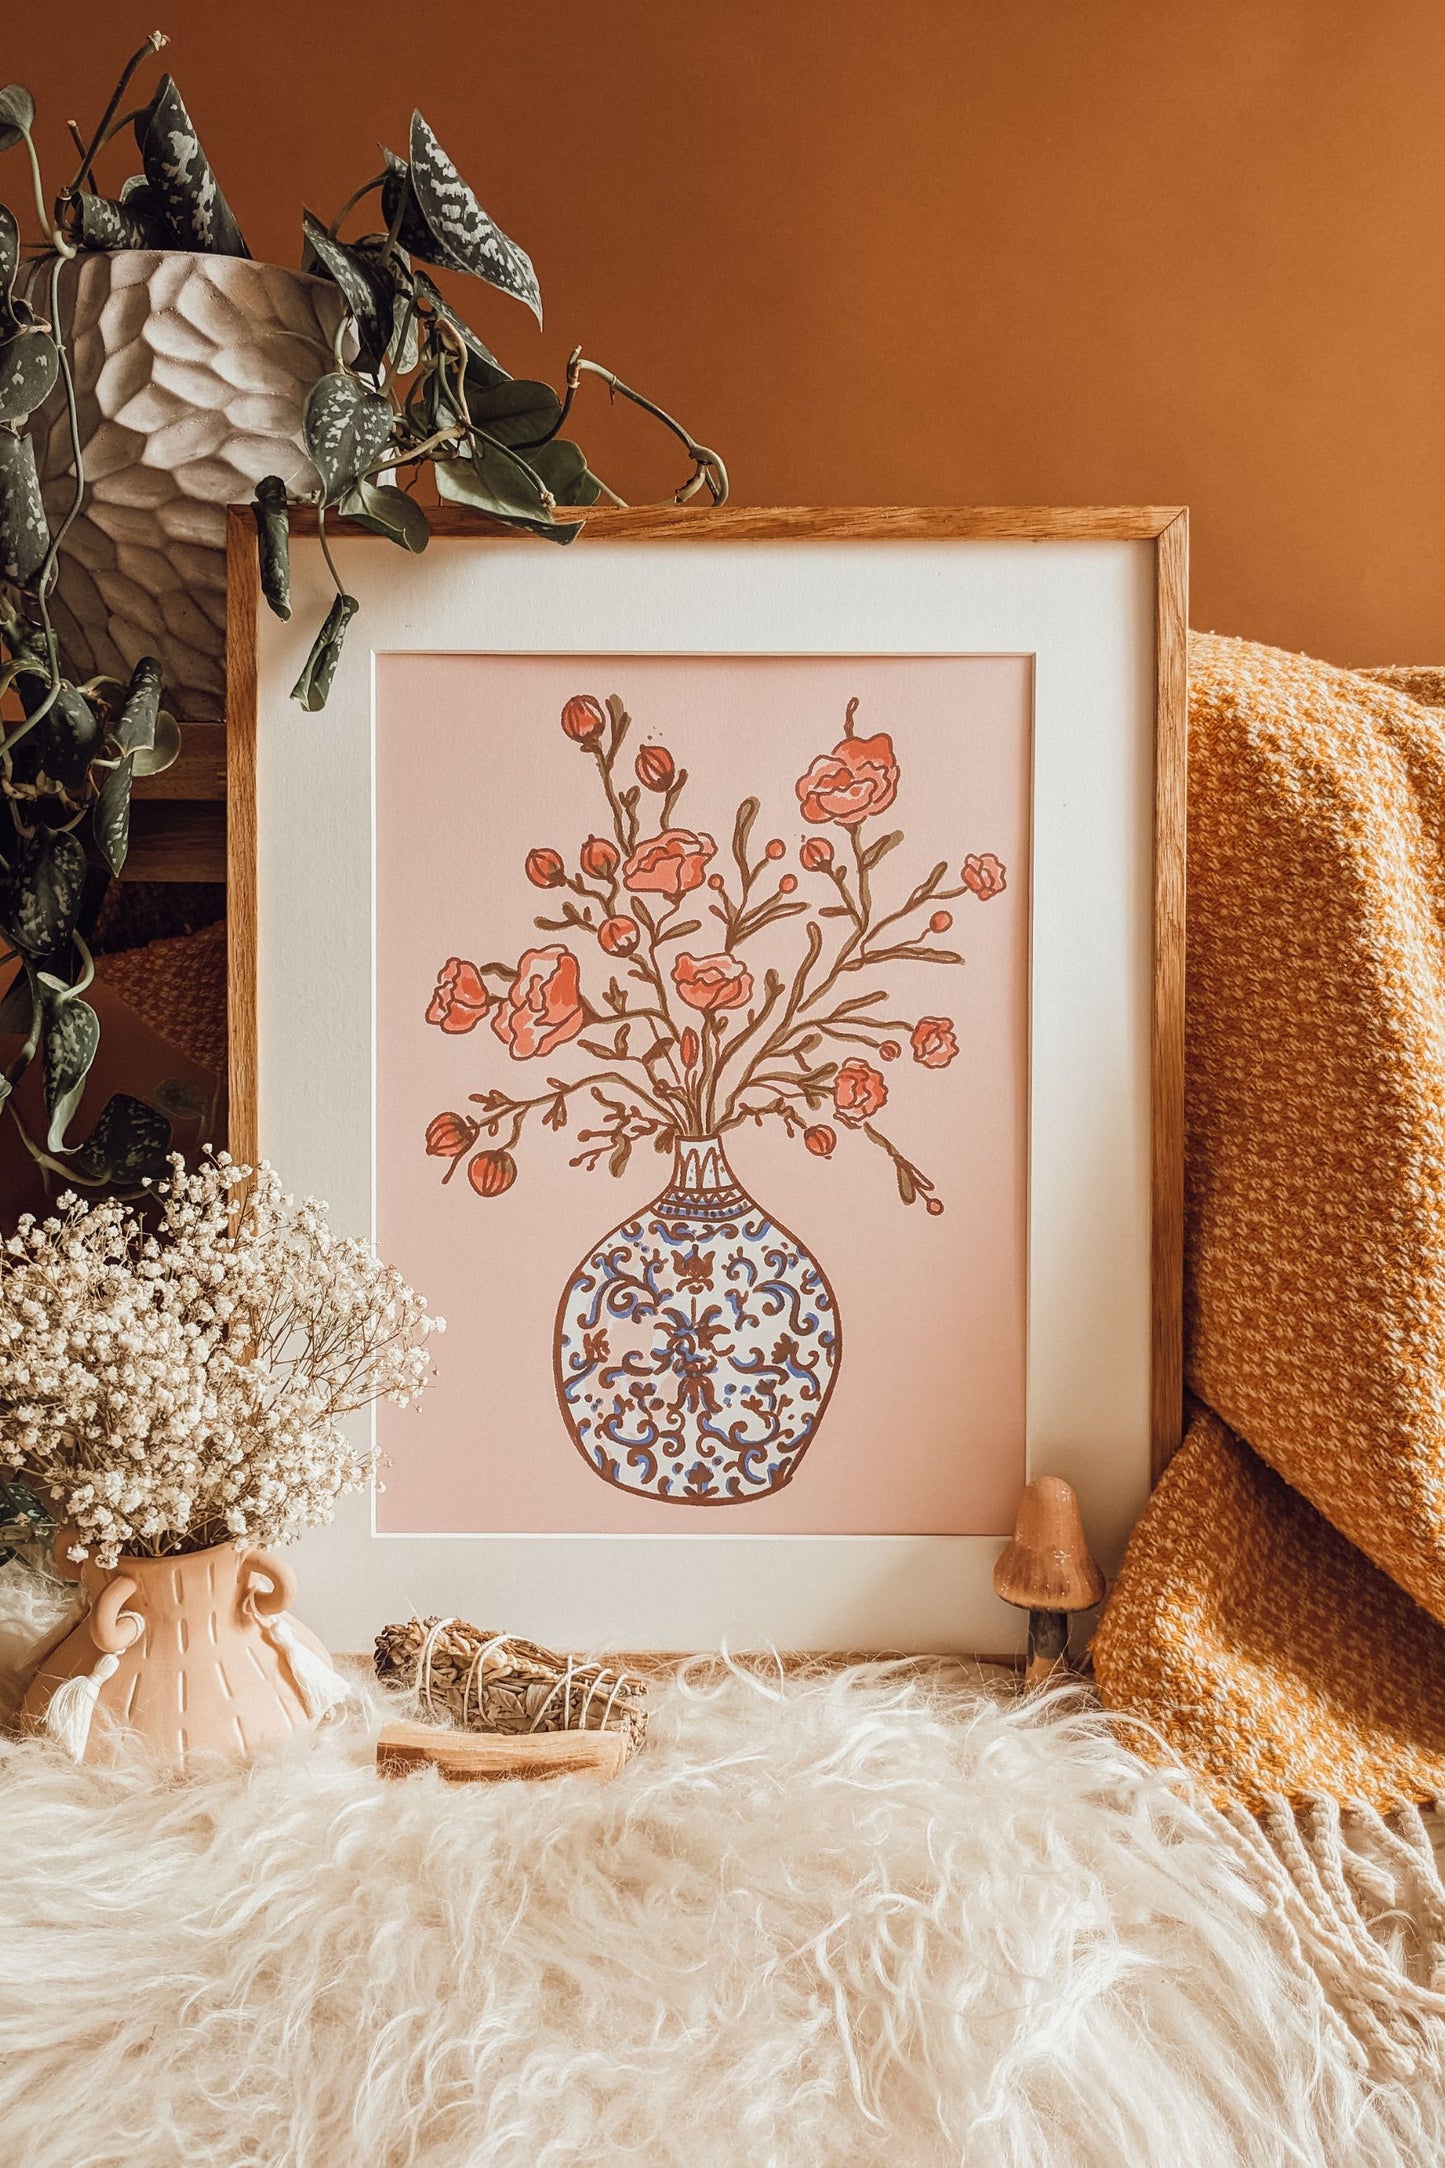 'A Room Full Of Blooms' Illustrated Art Print